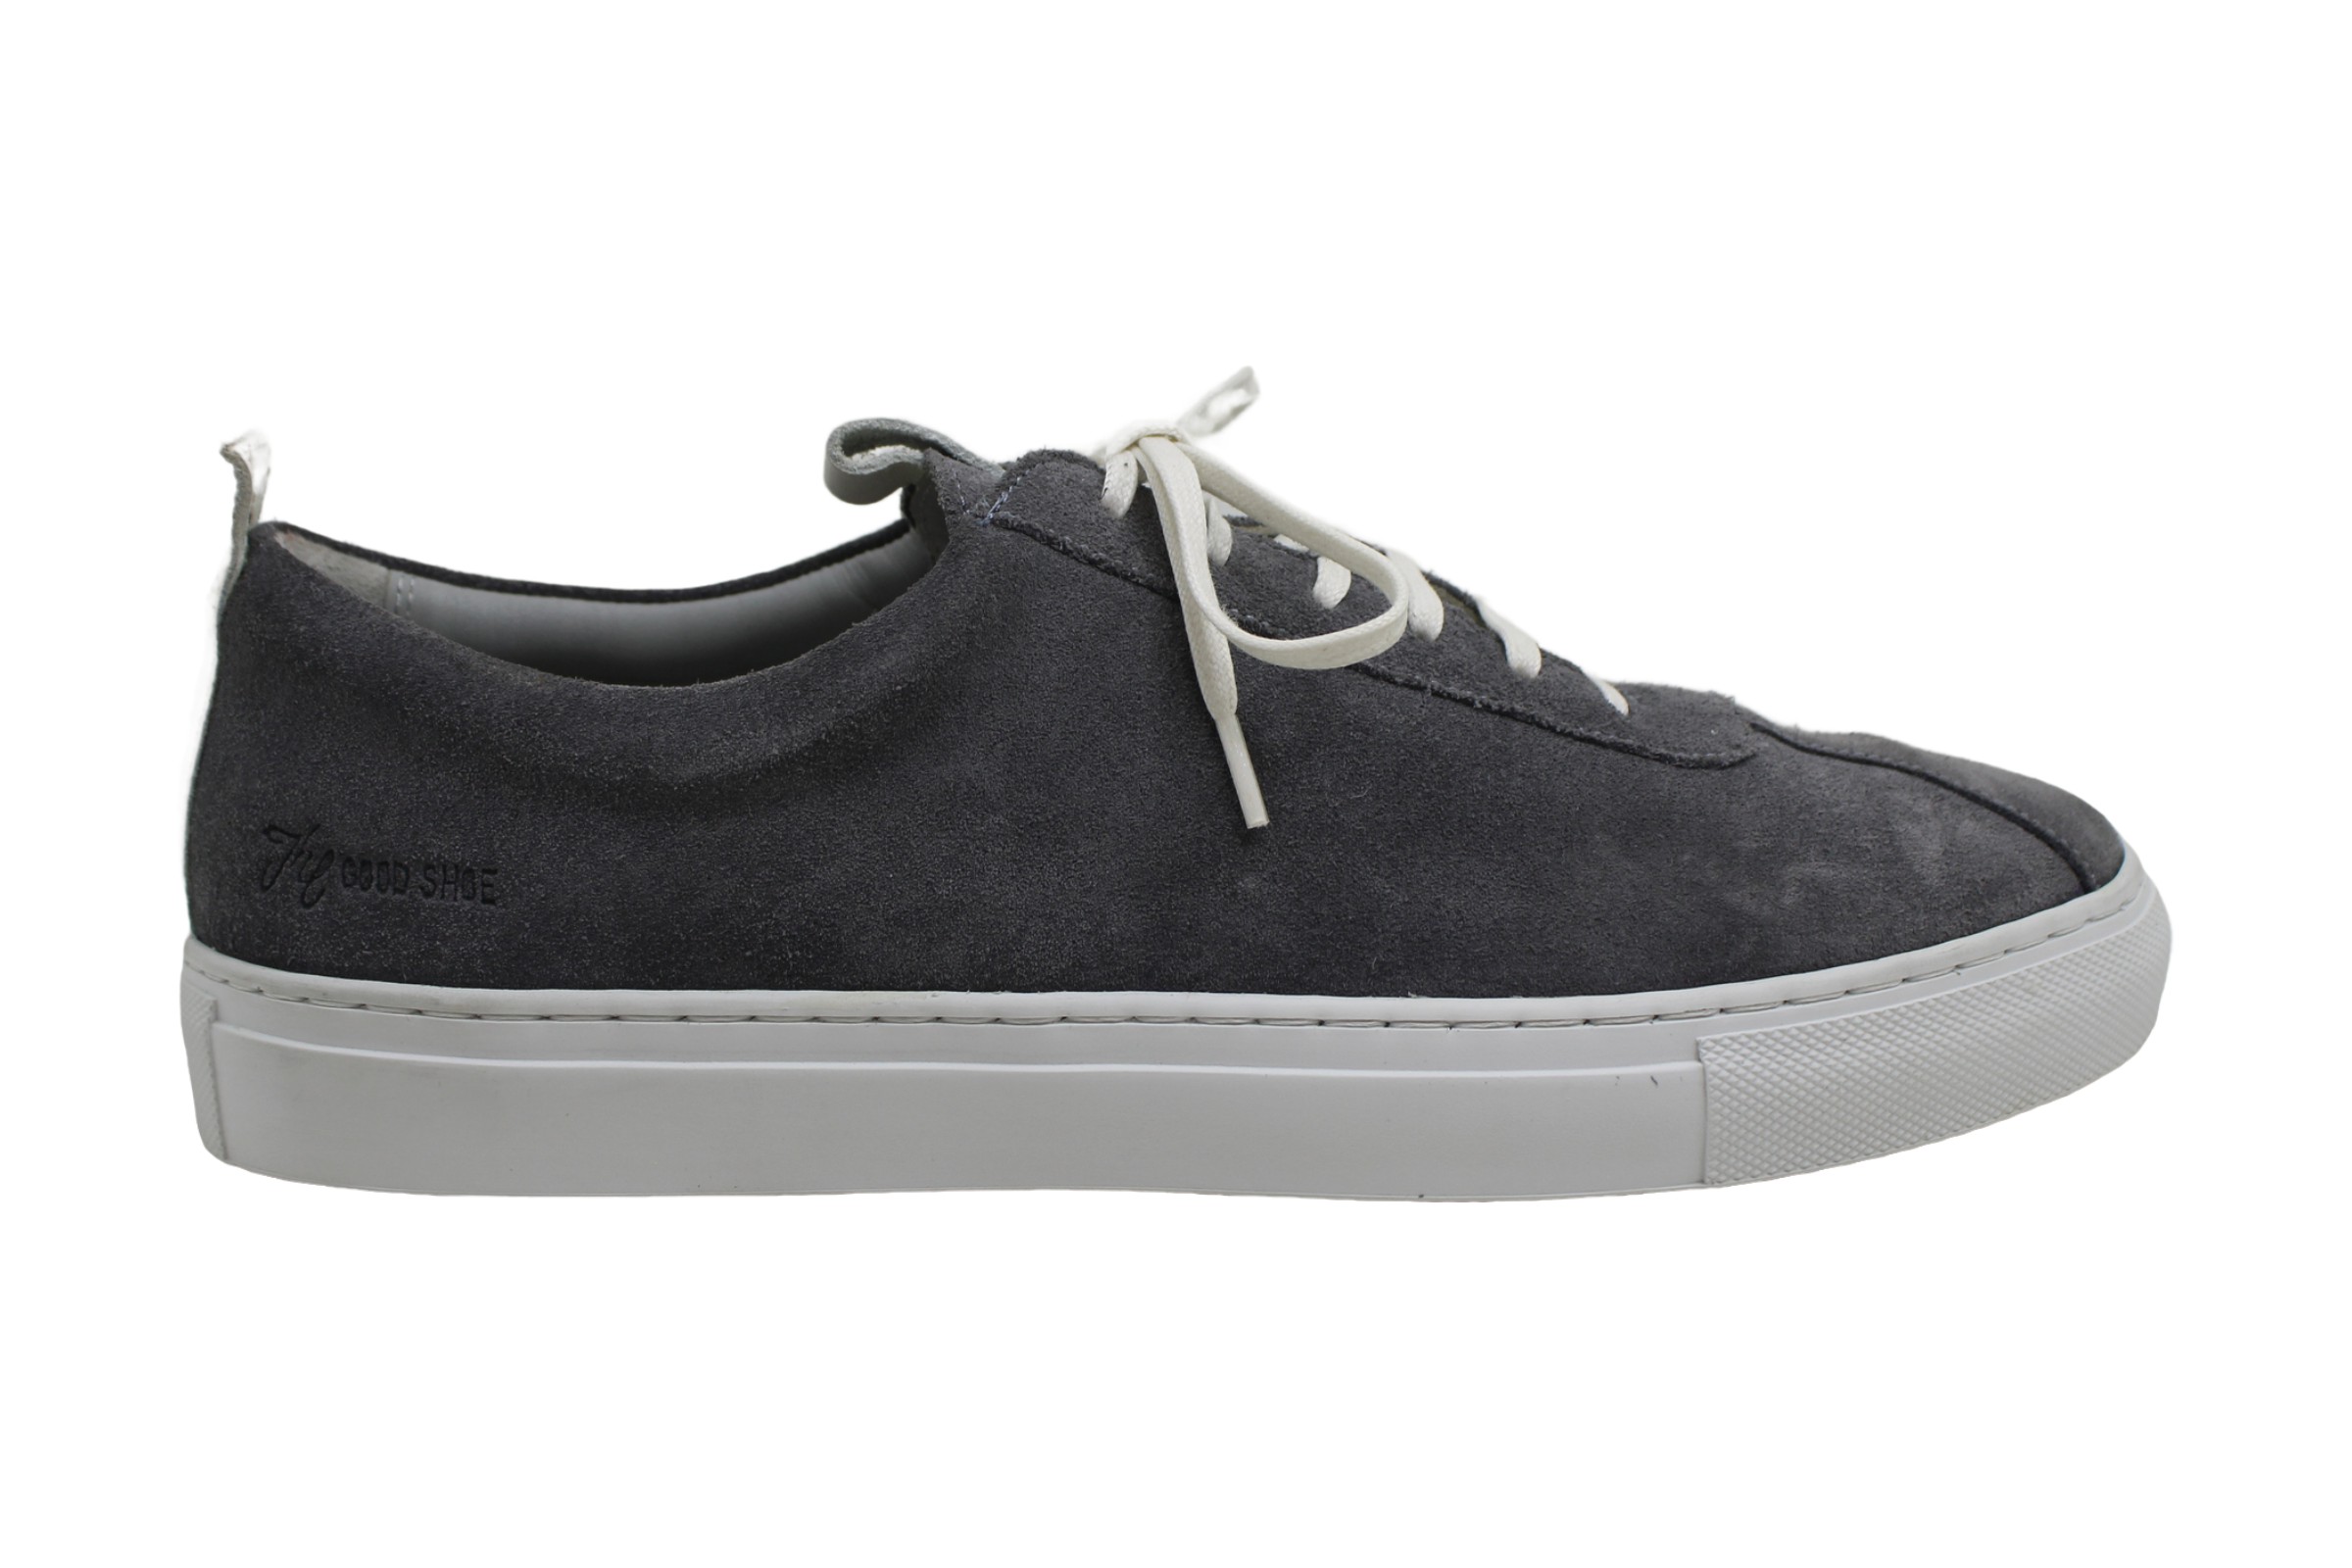 Grenson Womens ash Low Top Lace Up Fashion Sneakers, Grey, Size 10.0 | eBay